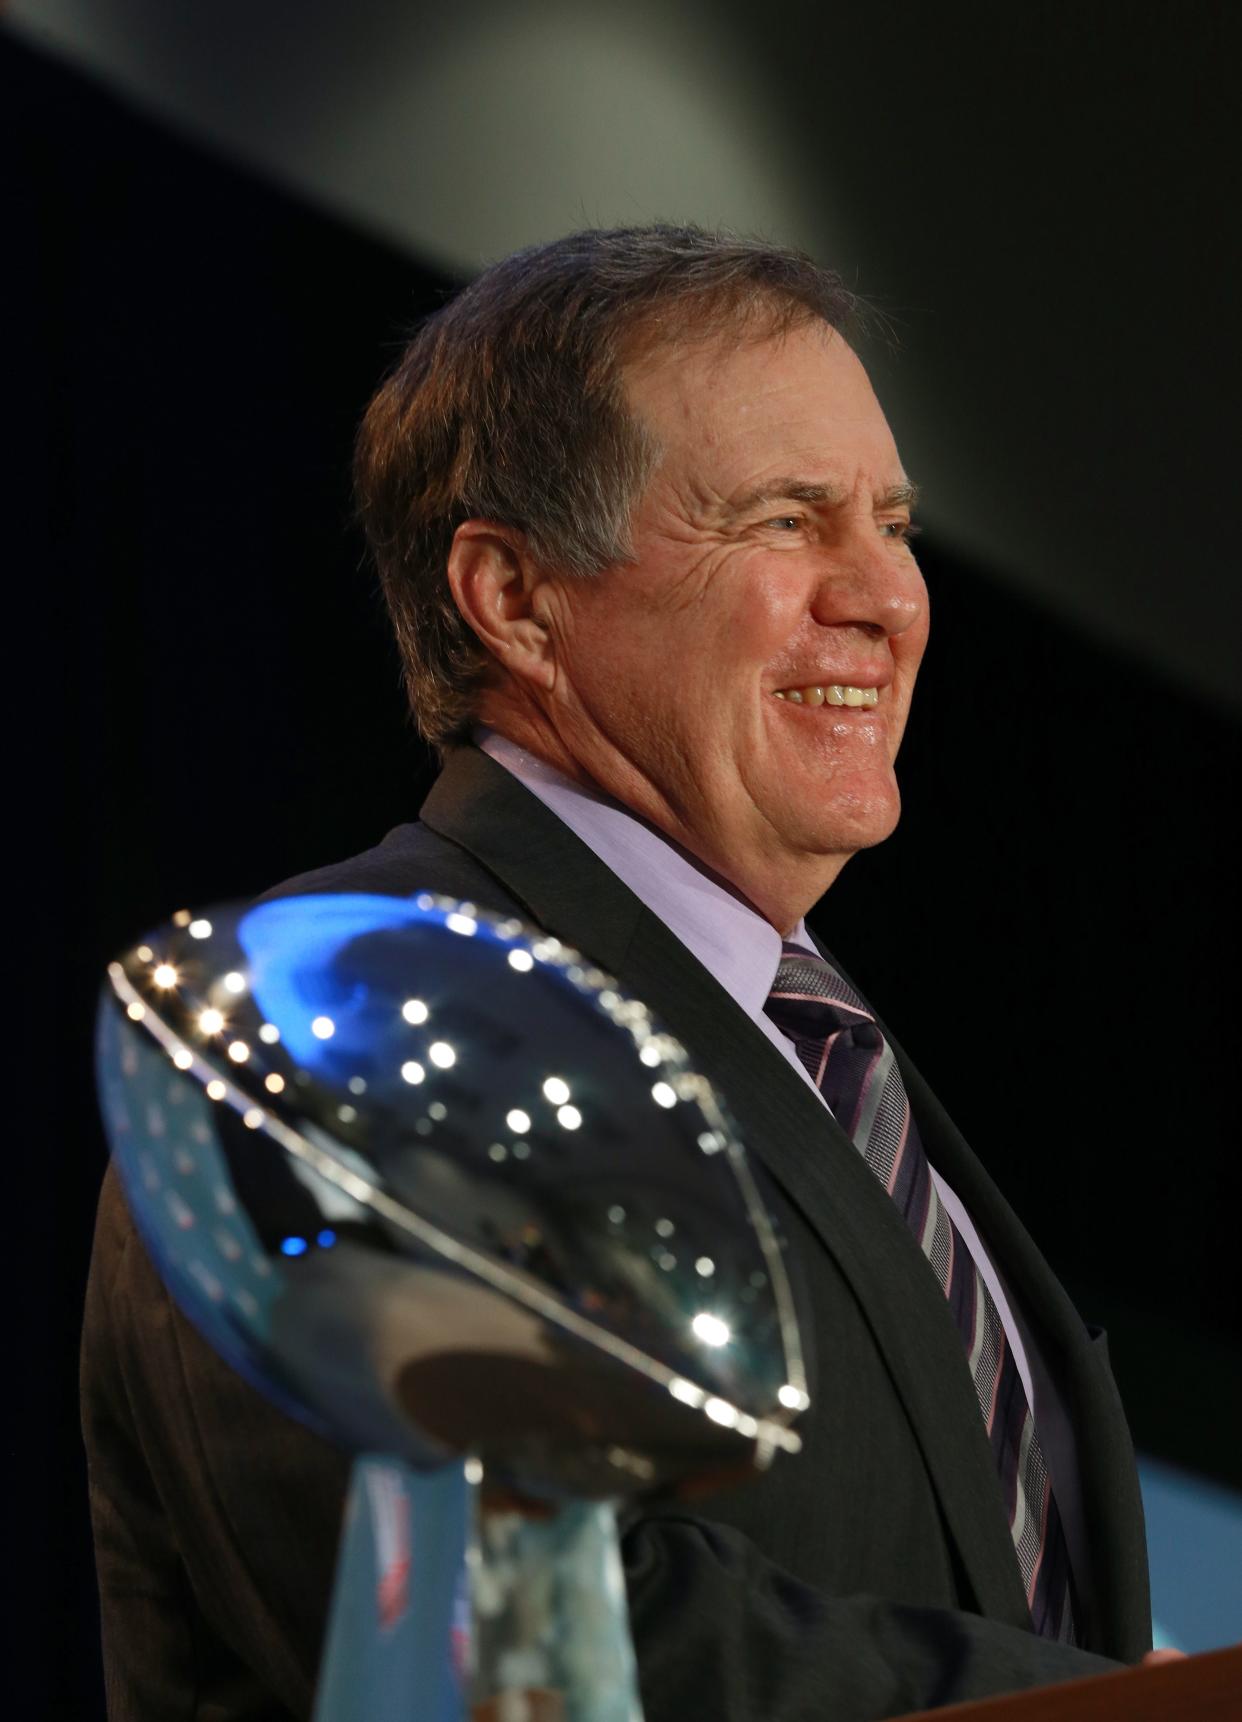 Patriots head coach Bill Belichick receives the Lombardi Trophy after winning Super Bowl 51 in Houston.